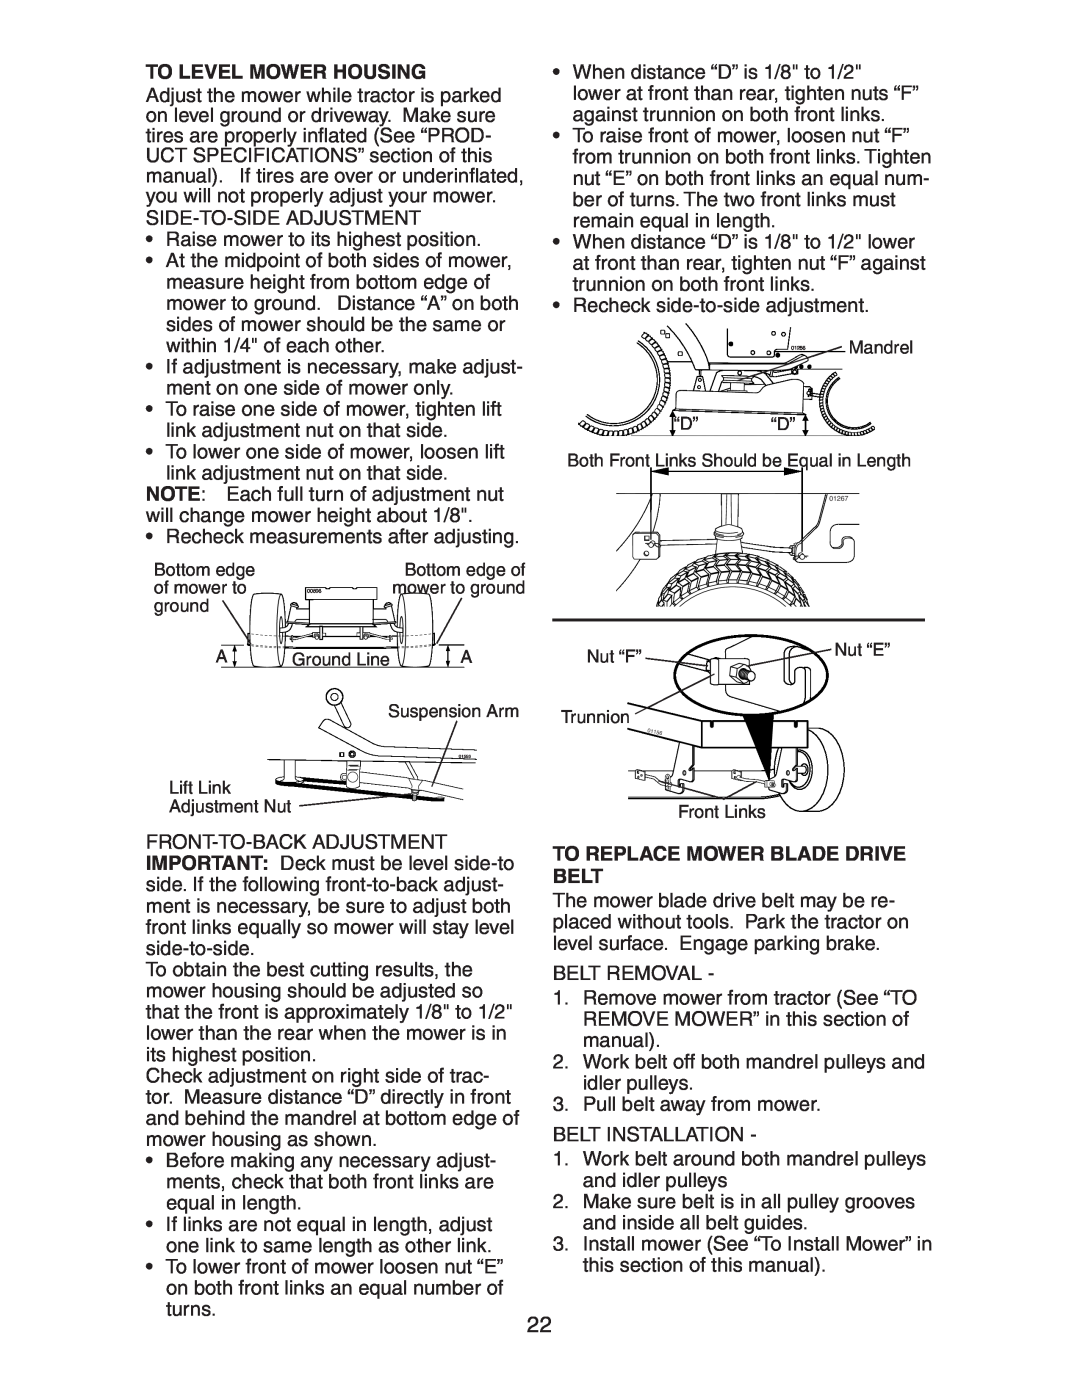 Craftsman 917.27581 owner manual To Level Mower Housing, To Replace Mower Blade Drive Belt 